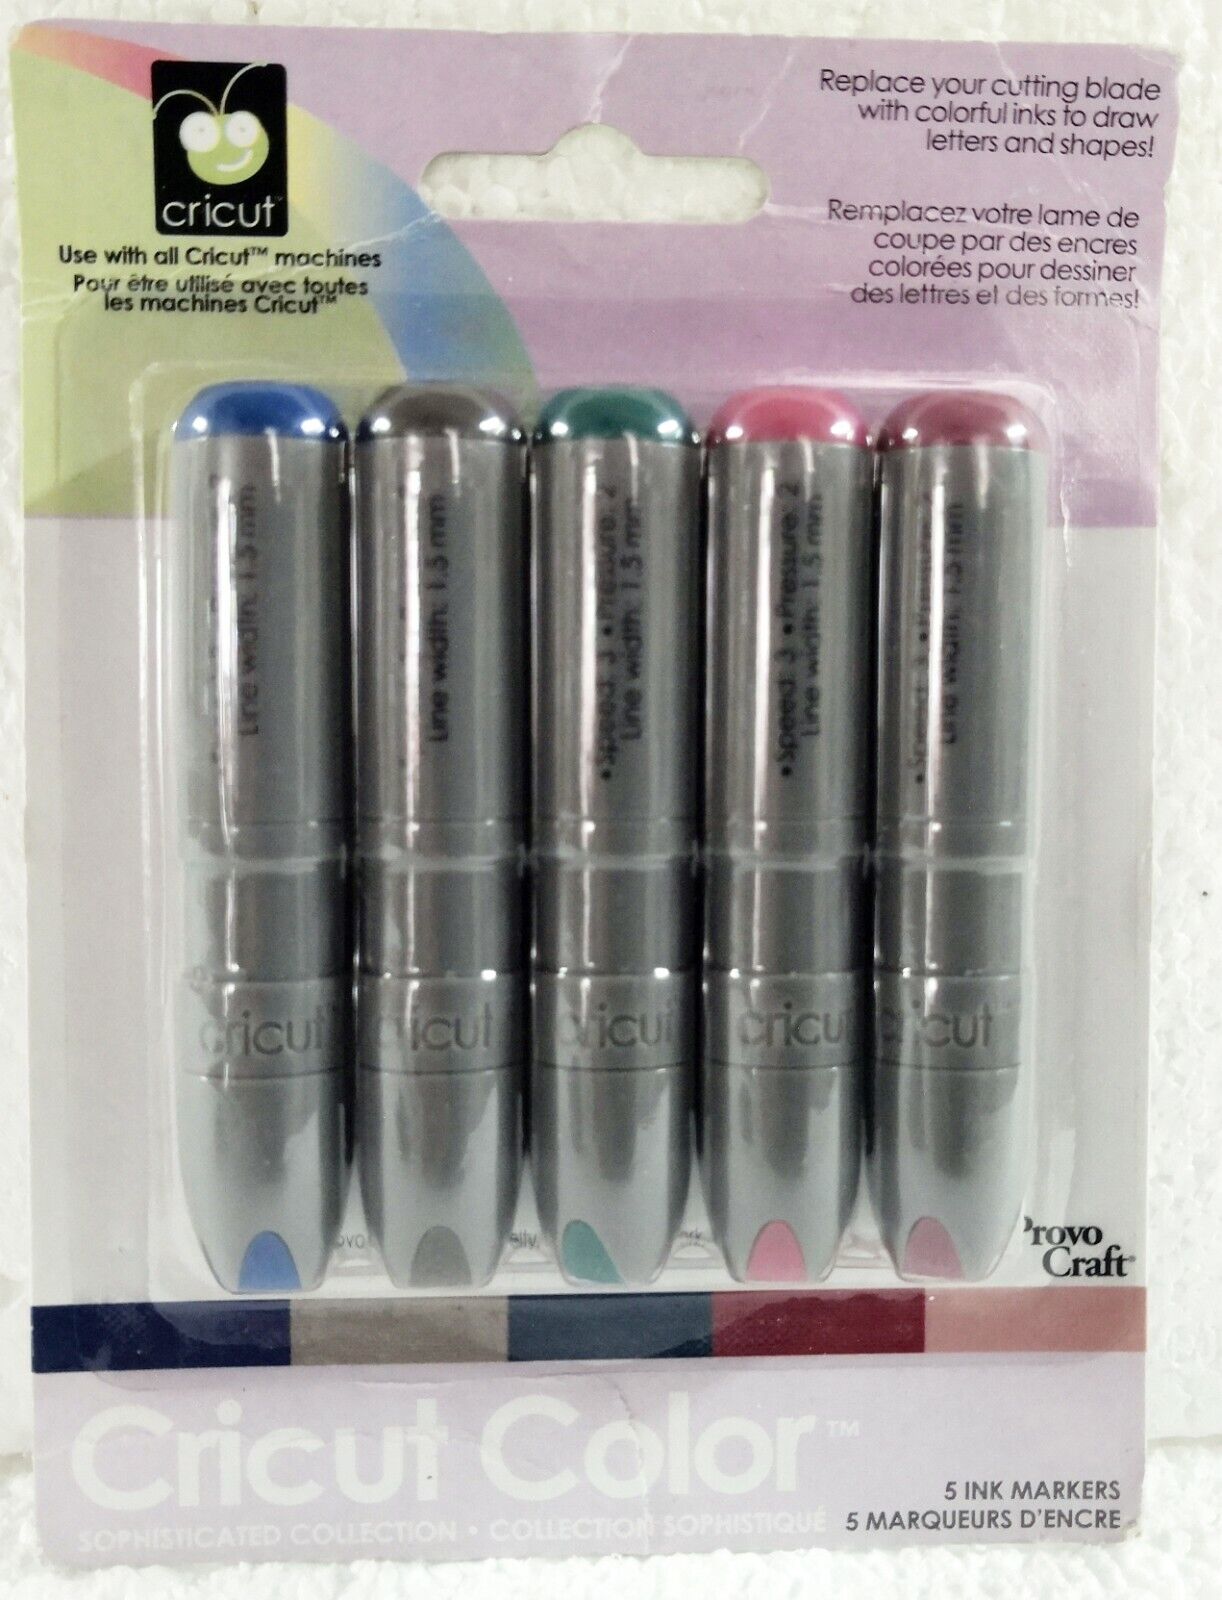 Provo Craft Cricut Ink 5-Pack: Sophisticated